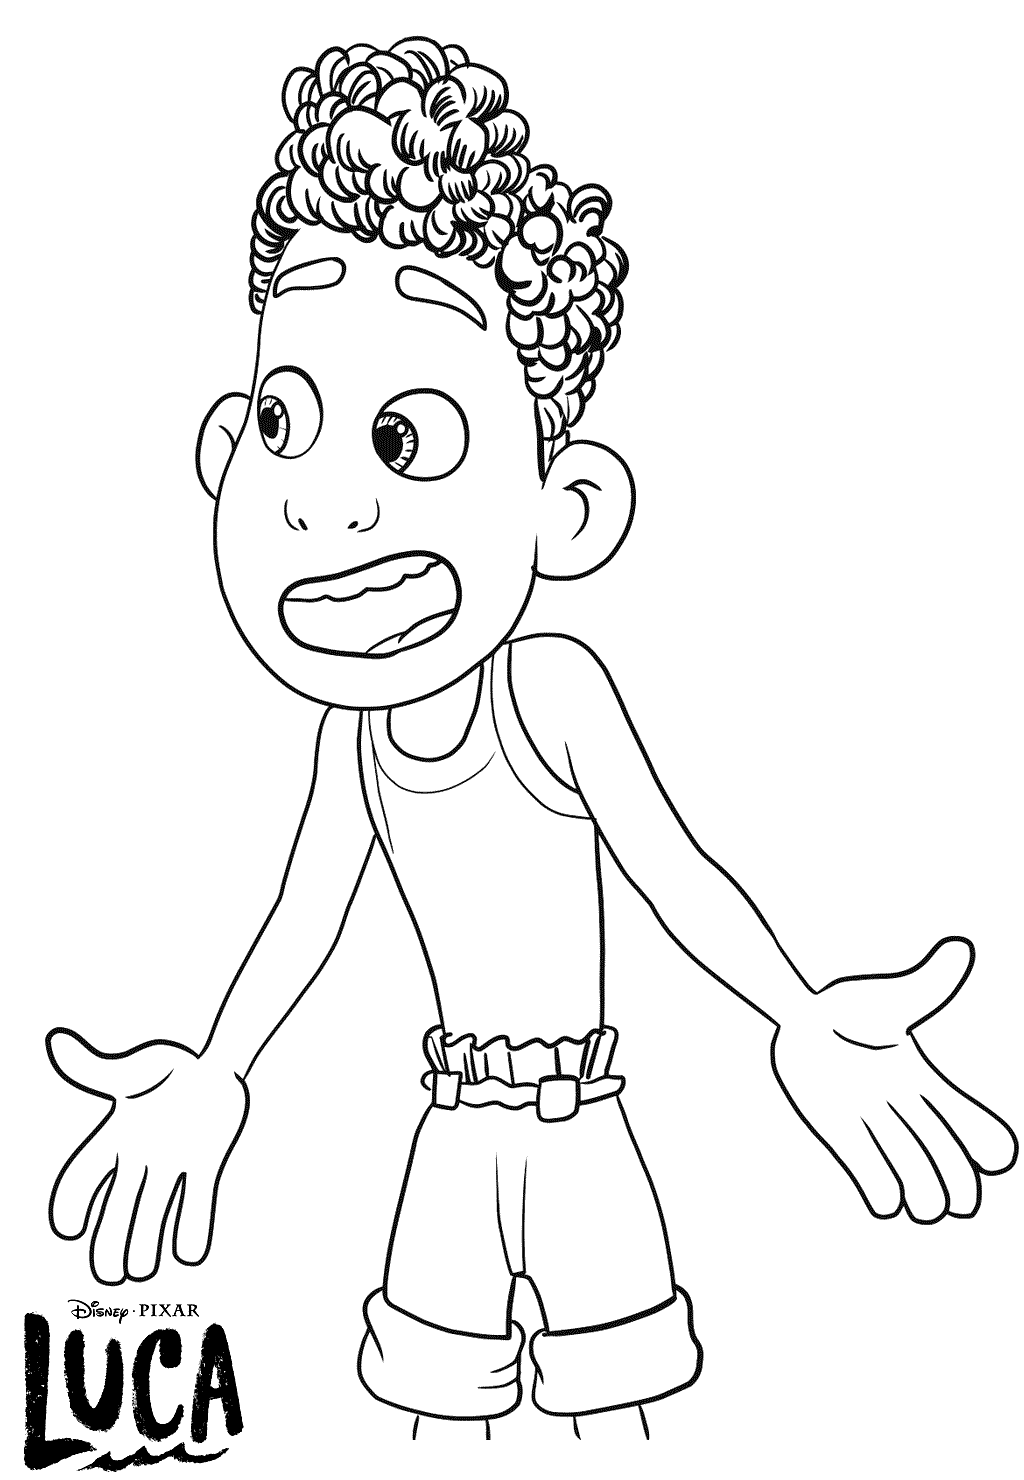 Disney Pixar Luca Coloring pages Coloring Article Coloring Articles